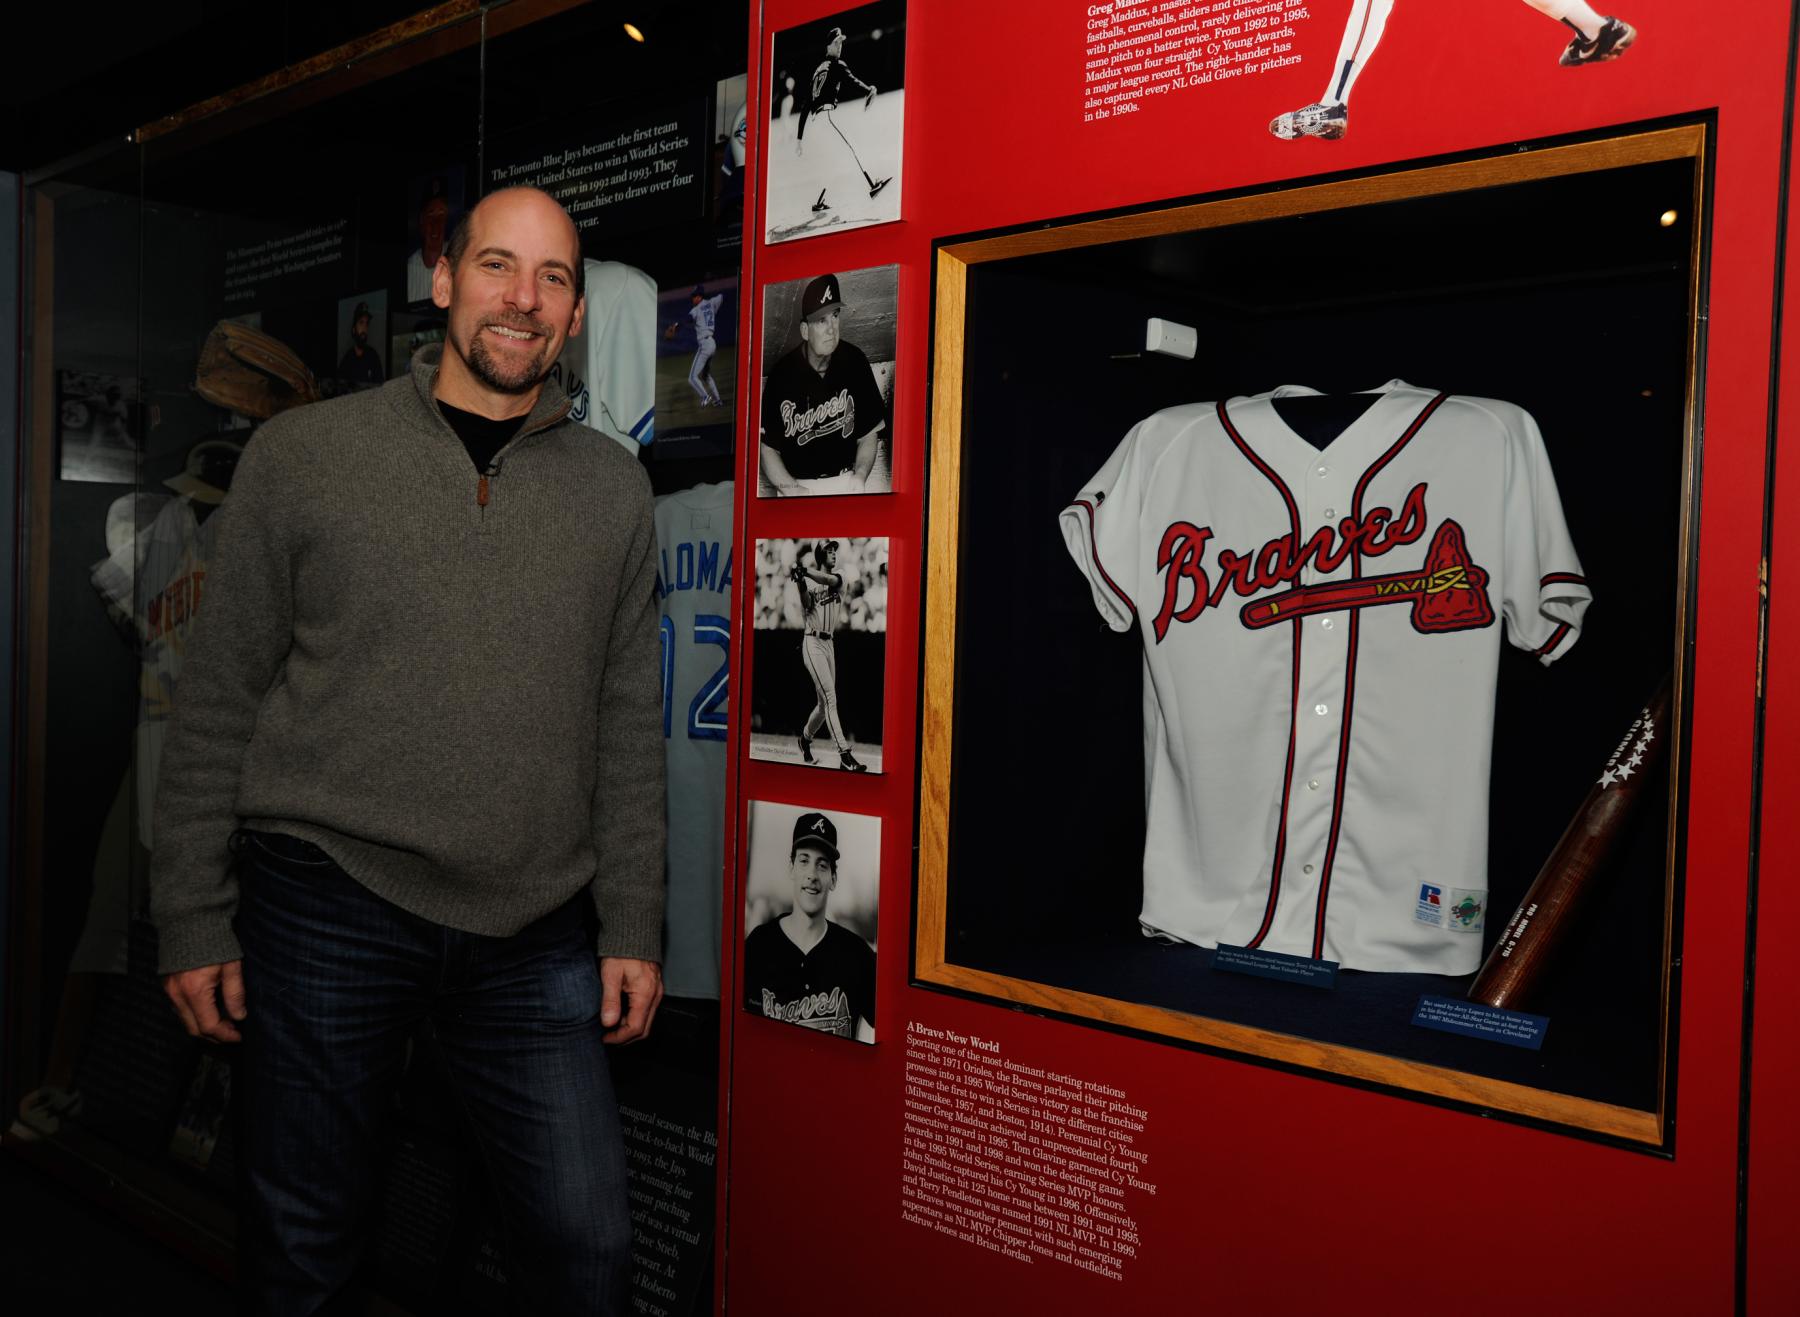 Welcome to Cooperstown, John Smoltz!